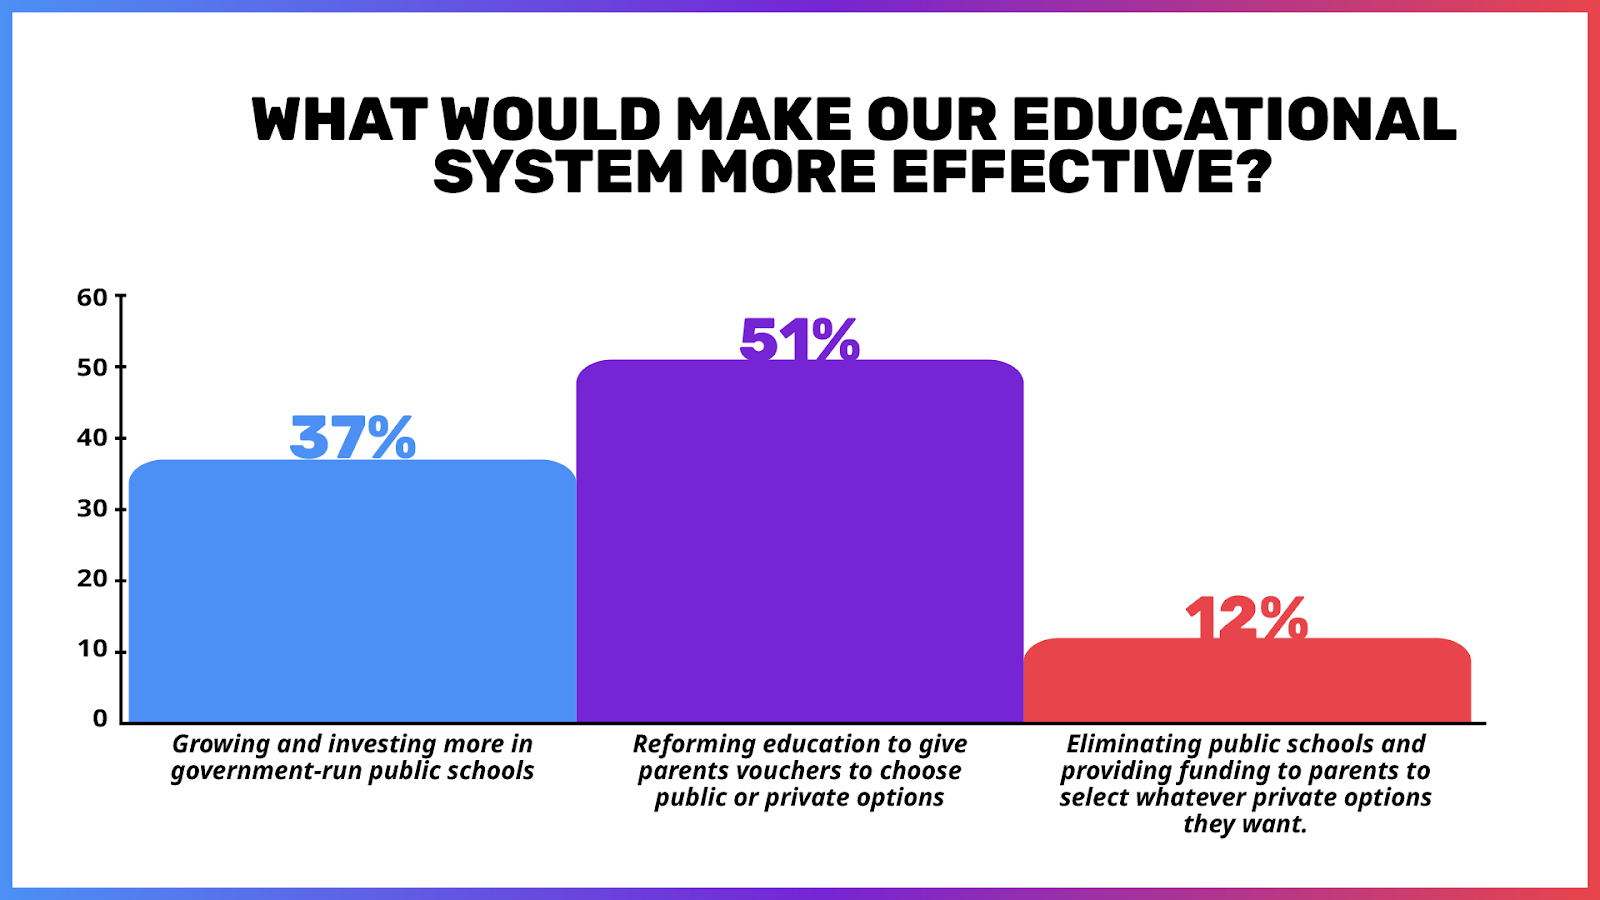 A bar chart titled 'What would make our educational system more effective?' shows three responses: 'Growing and investing more in government-run public schools' at 37% in blue, 'Reforming education to give parents vouchers to choose public or private options' at 51% in purple, and 'Eliminating public schools and providing funding to parents to select whatever private options they want' at 12% in red.